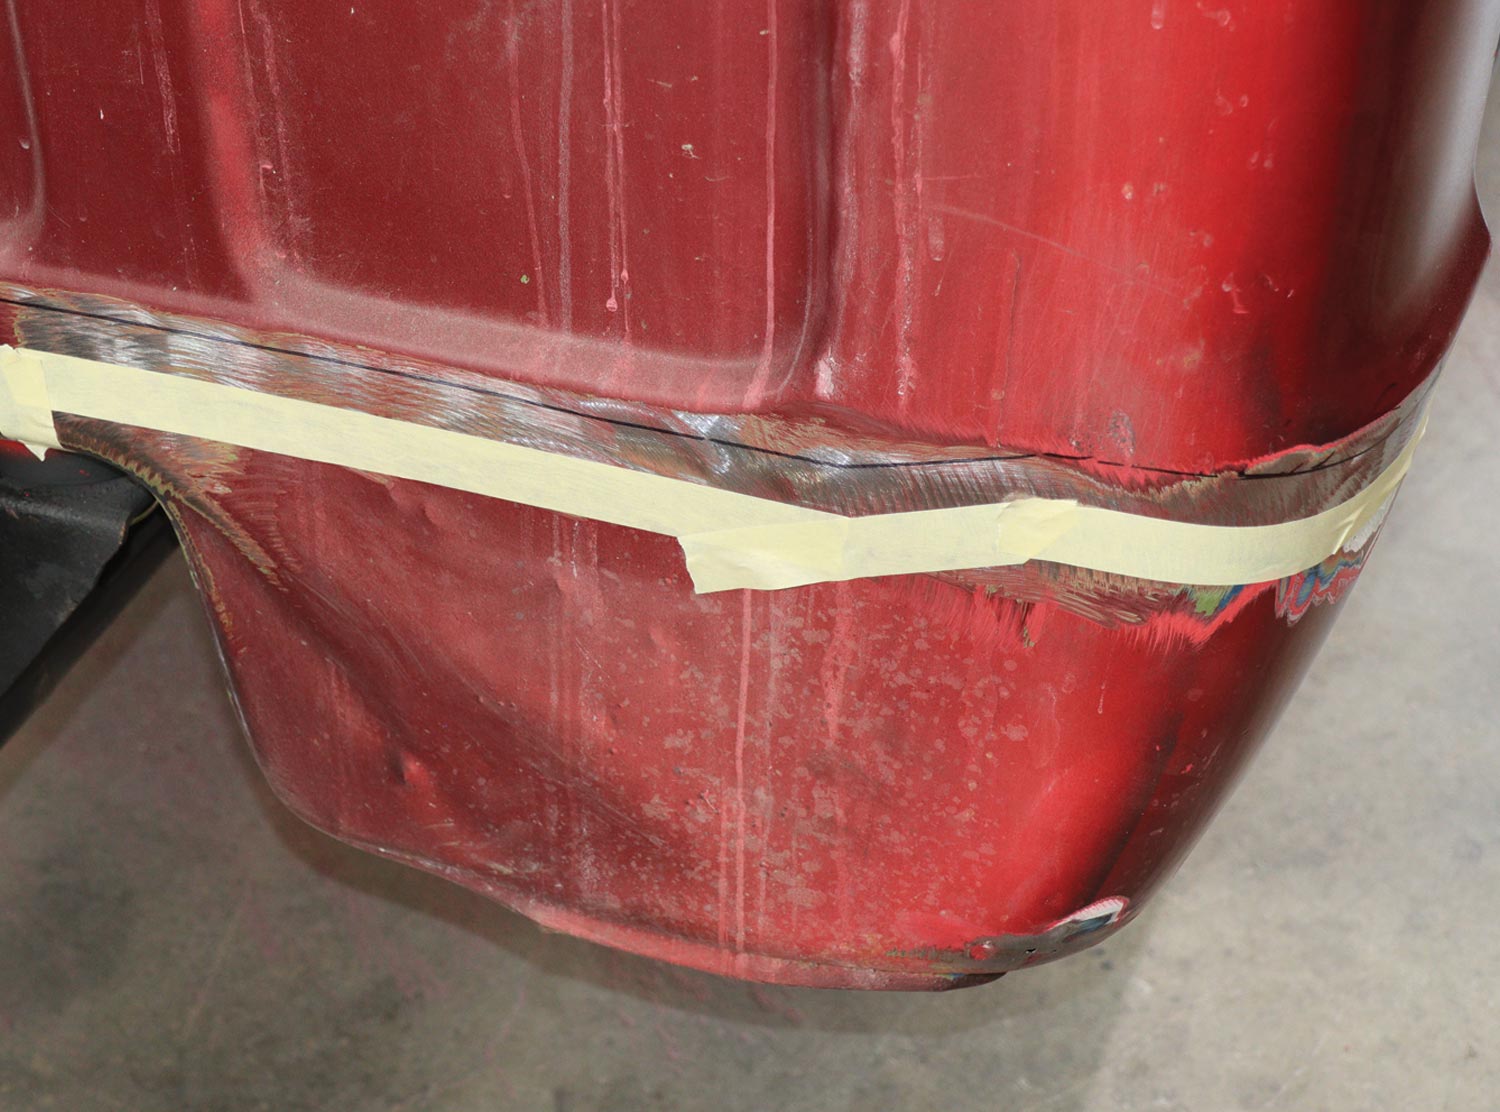 for the cut line to remove the original cab corner 1-inch masking tape was placed 1 inch below the alignment line